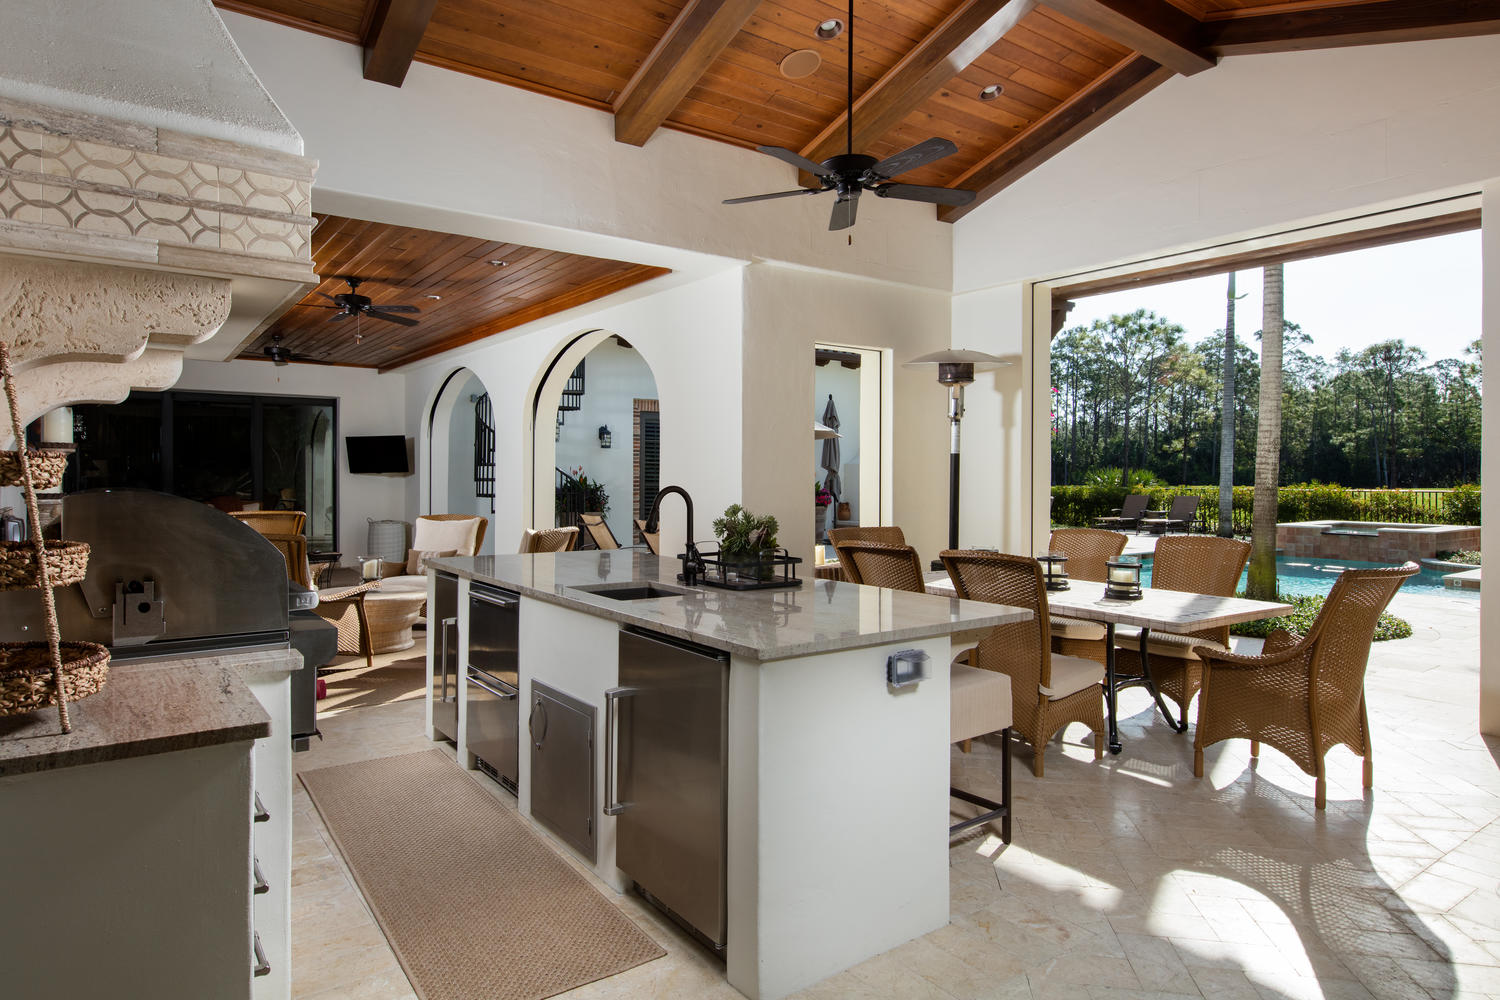 Luxury outdoor kitchens are on the list of must-haves for your outdoor living space.